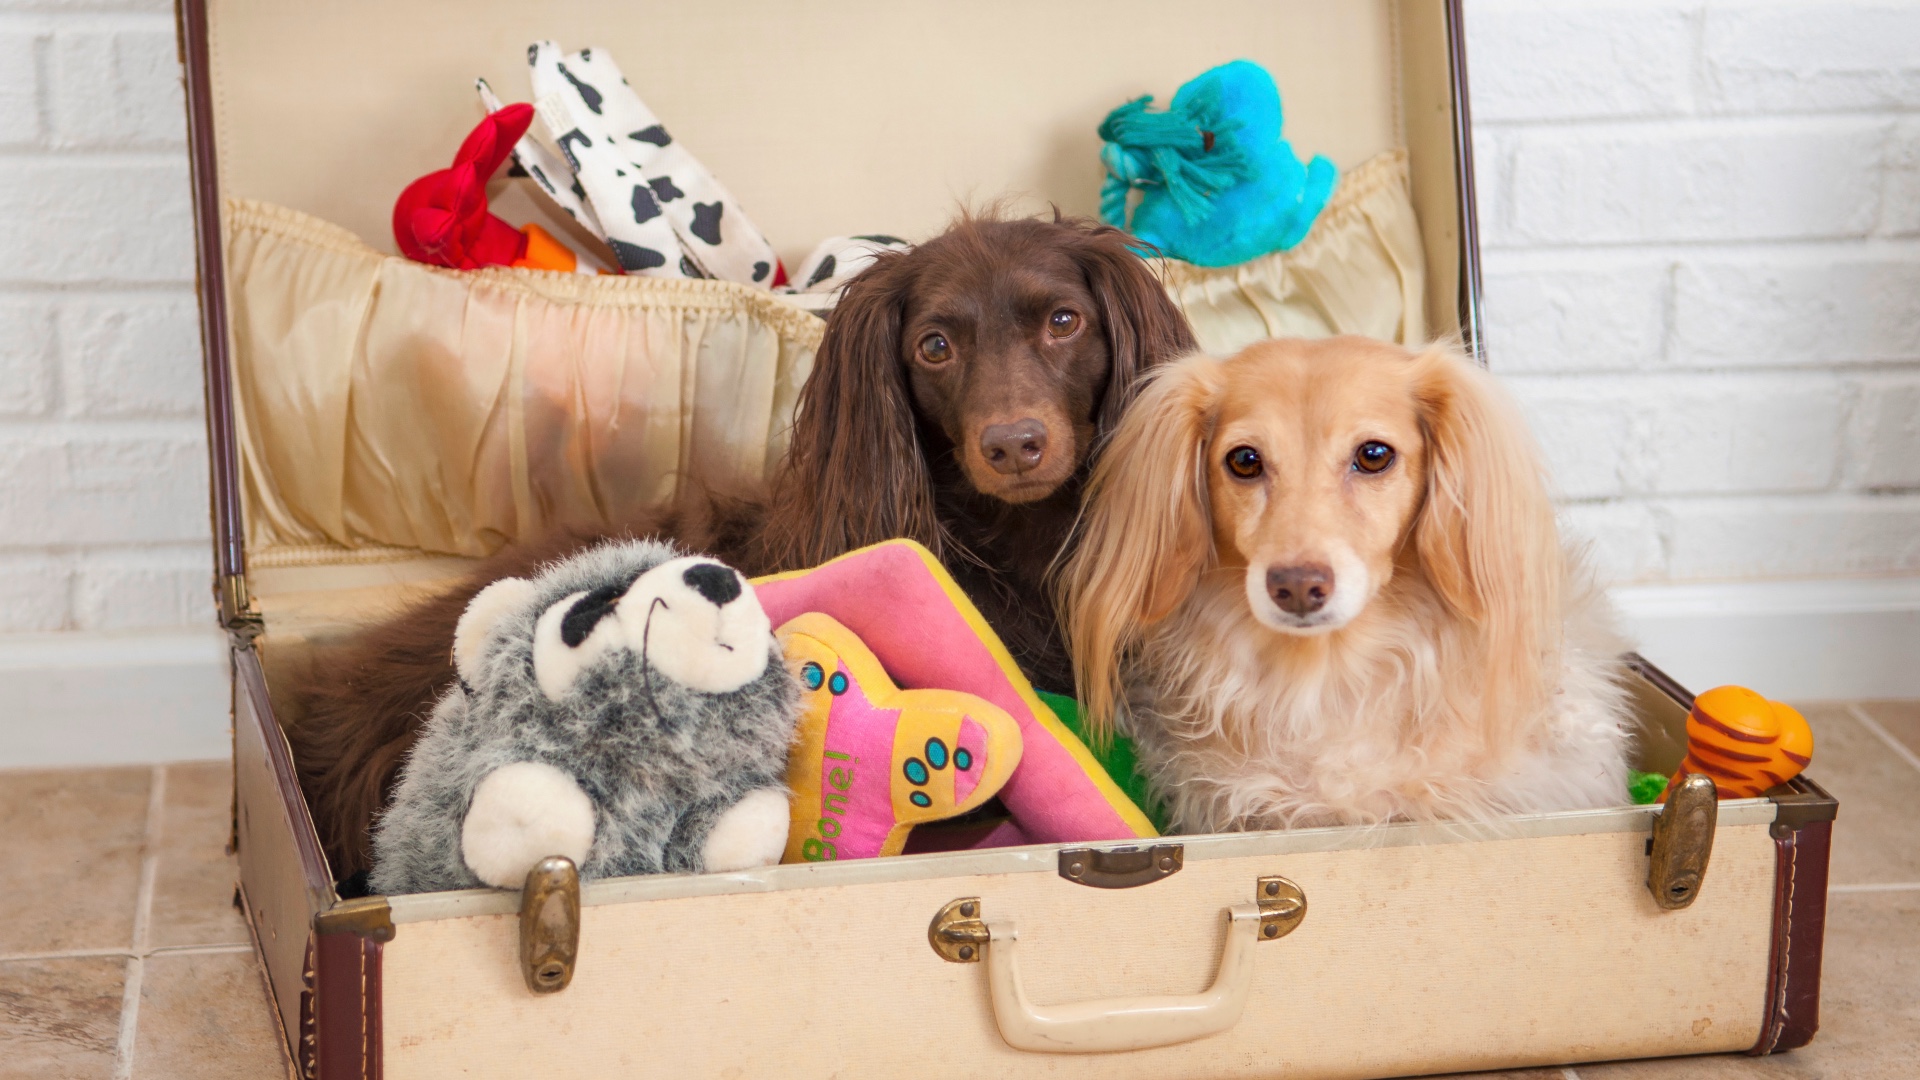 10 Dog Toy Storage Ideas That Will Make Your Pup Smile